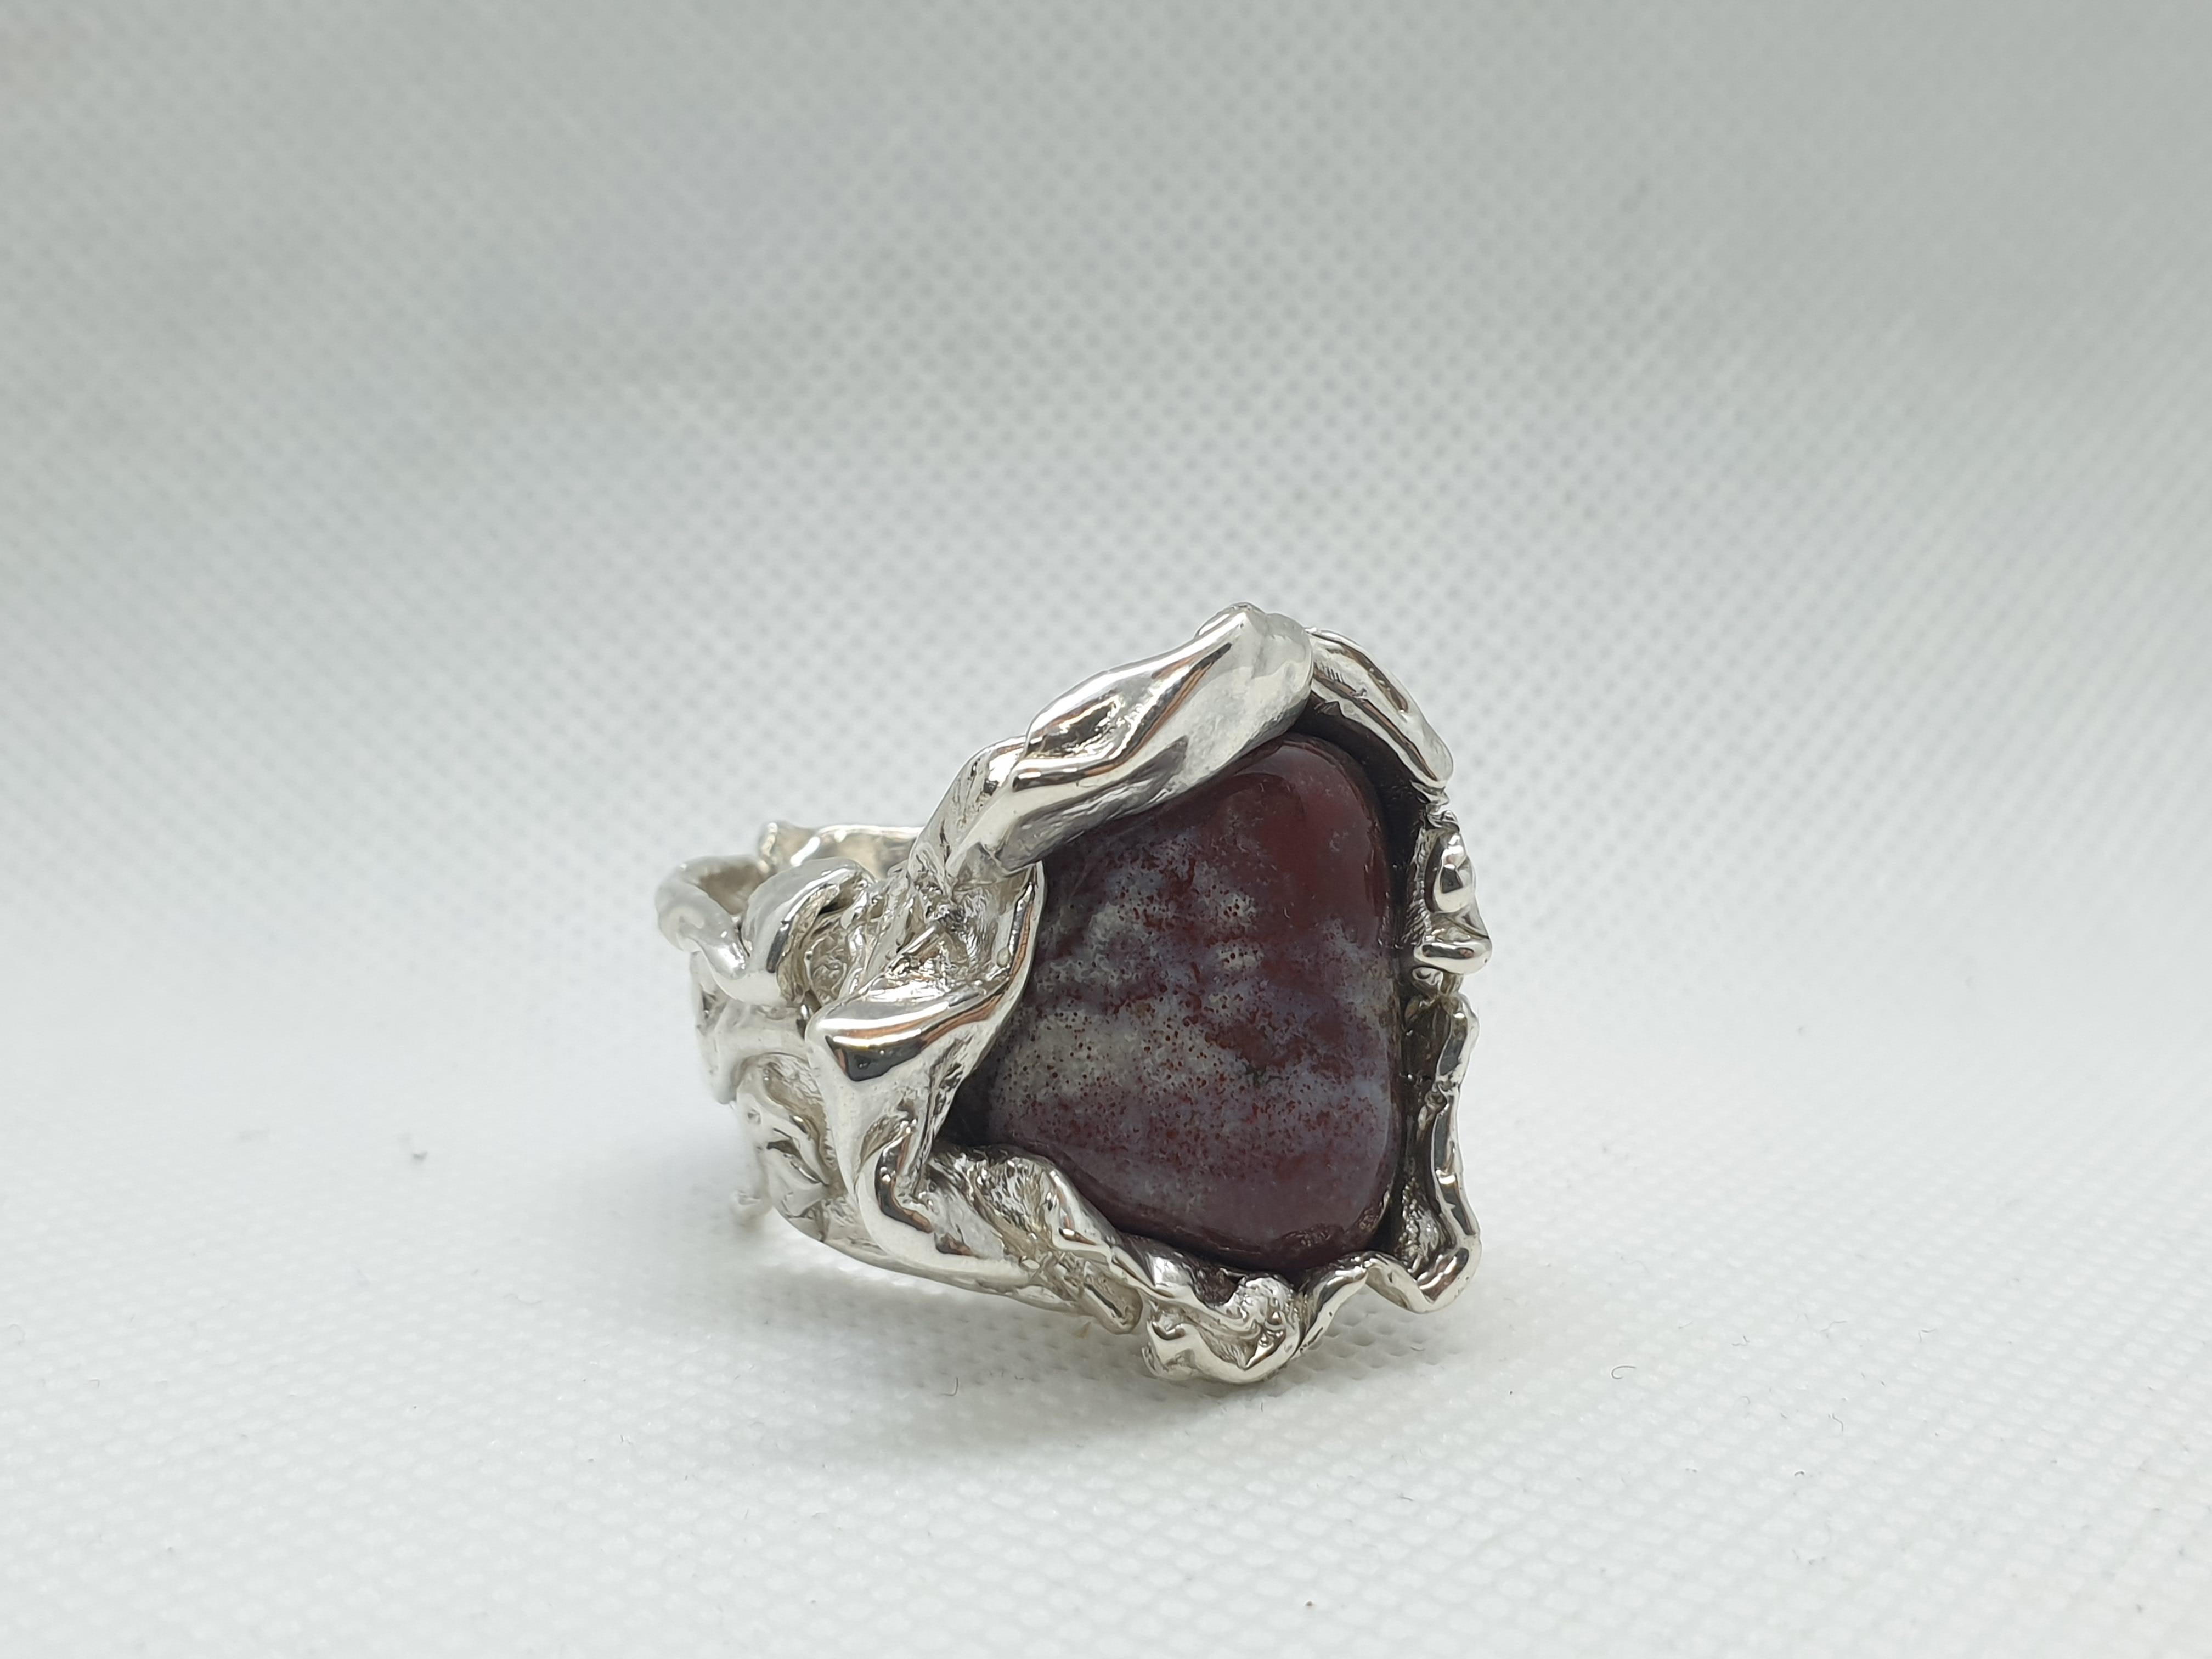 Sculpture ring , sterling silver and lepidolite crystal.

Hand made.

Size 6.5 USA
Internal diameter 17.80mm